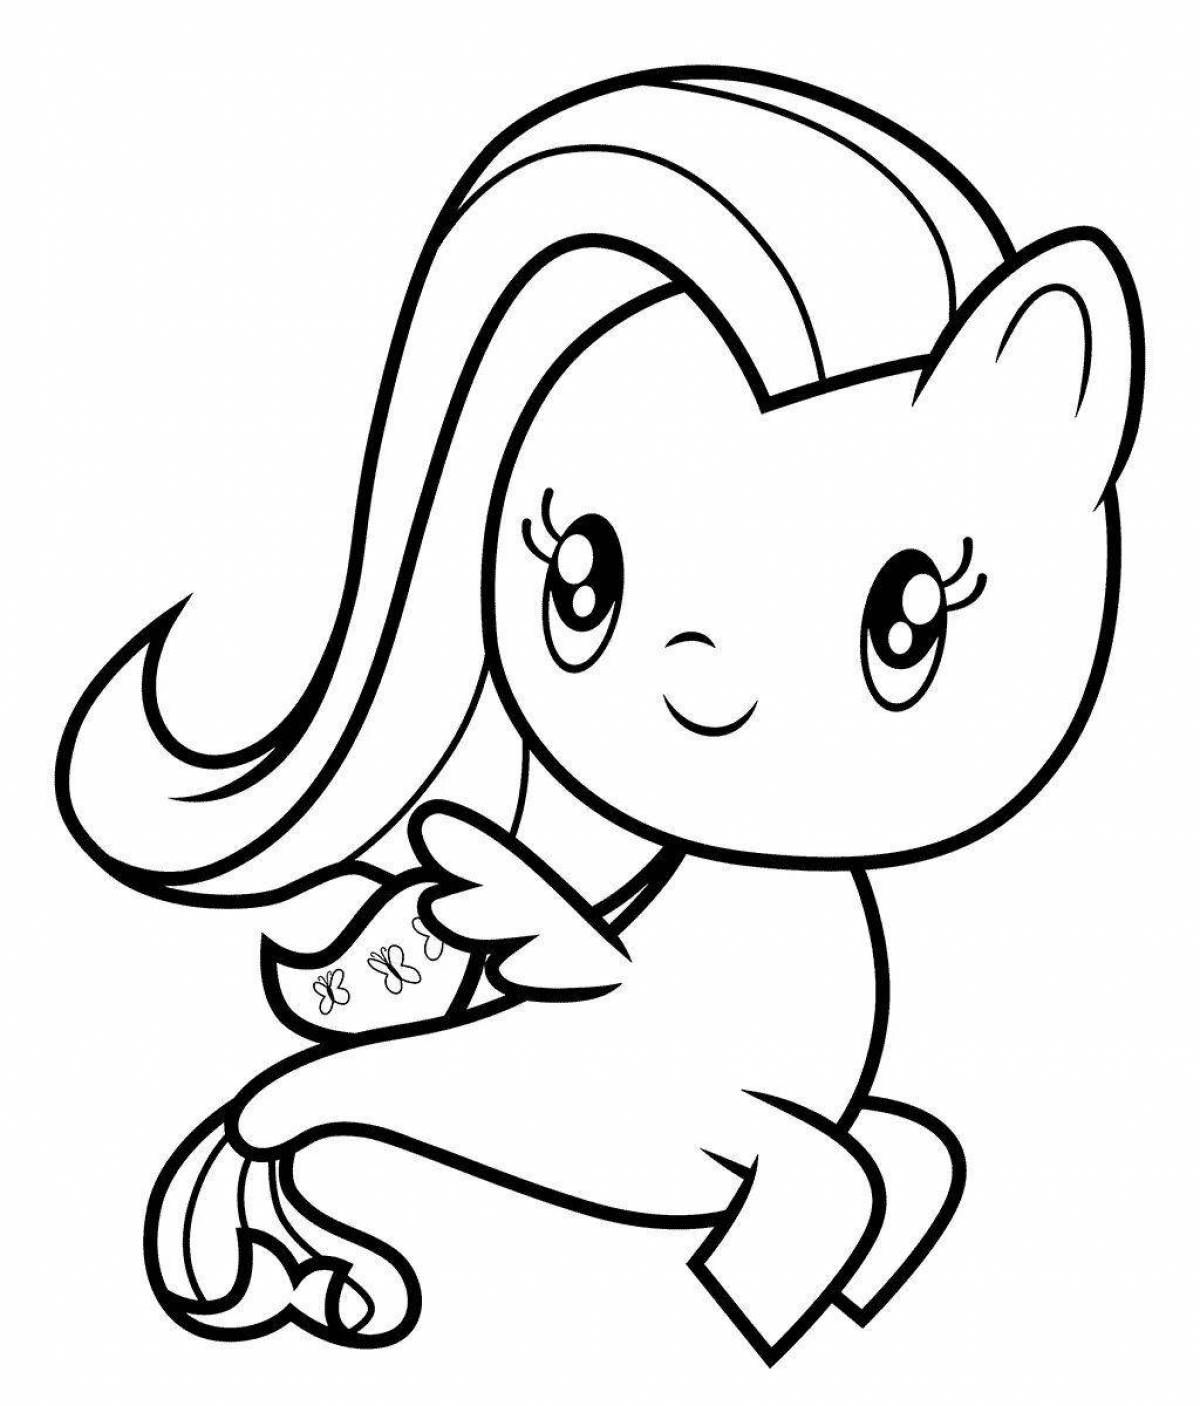 Sweet mini pony coloring page